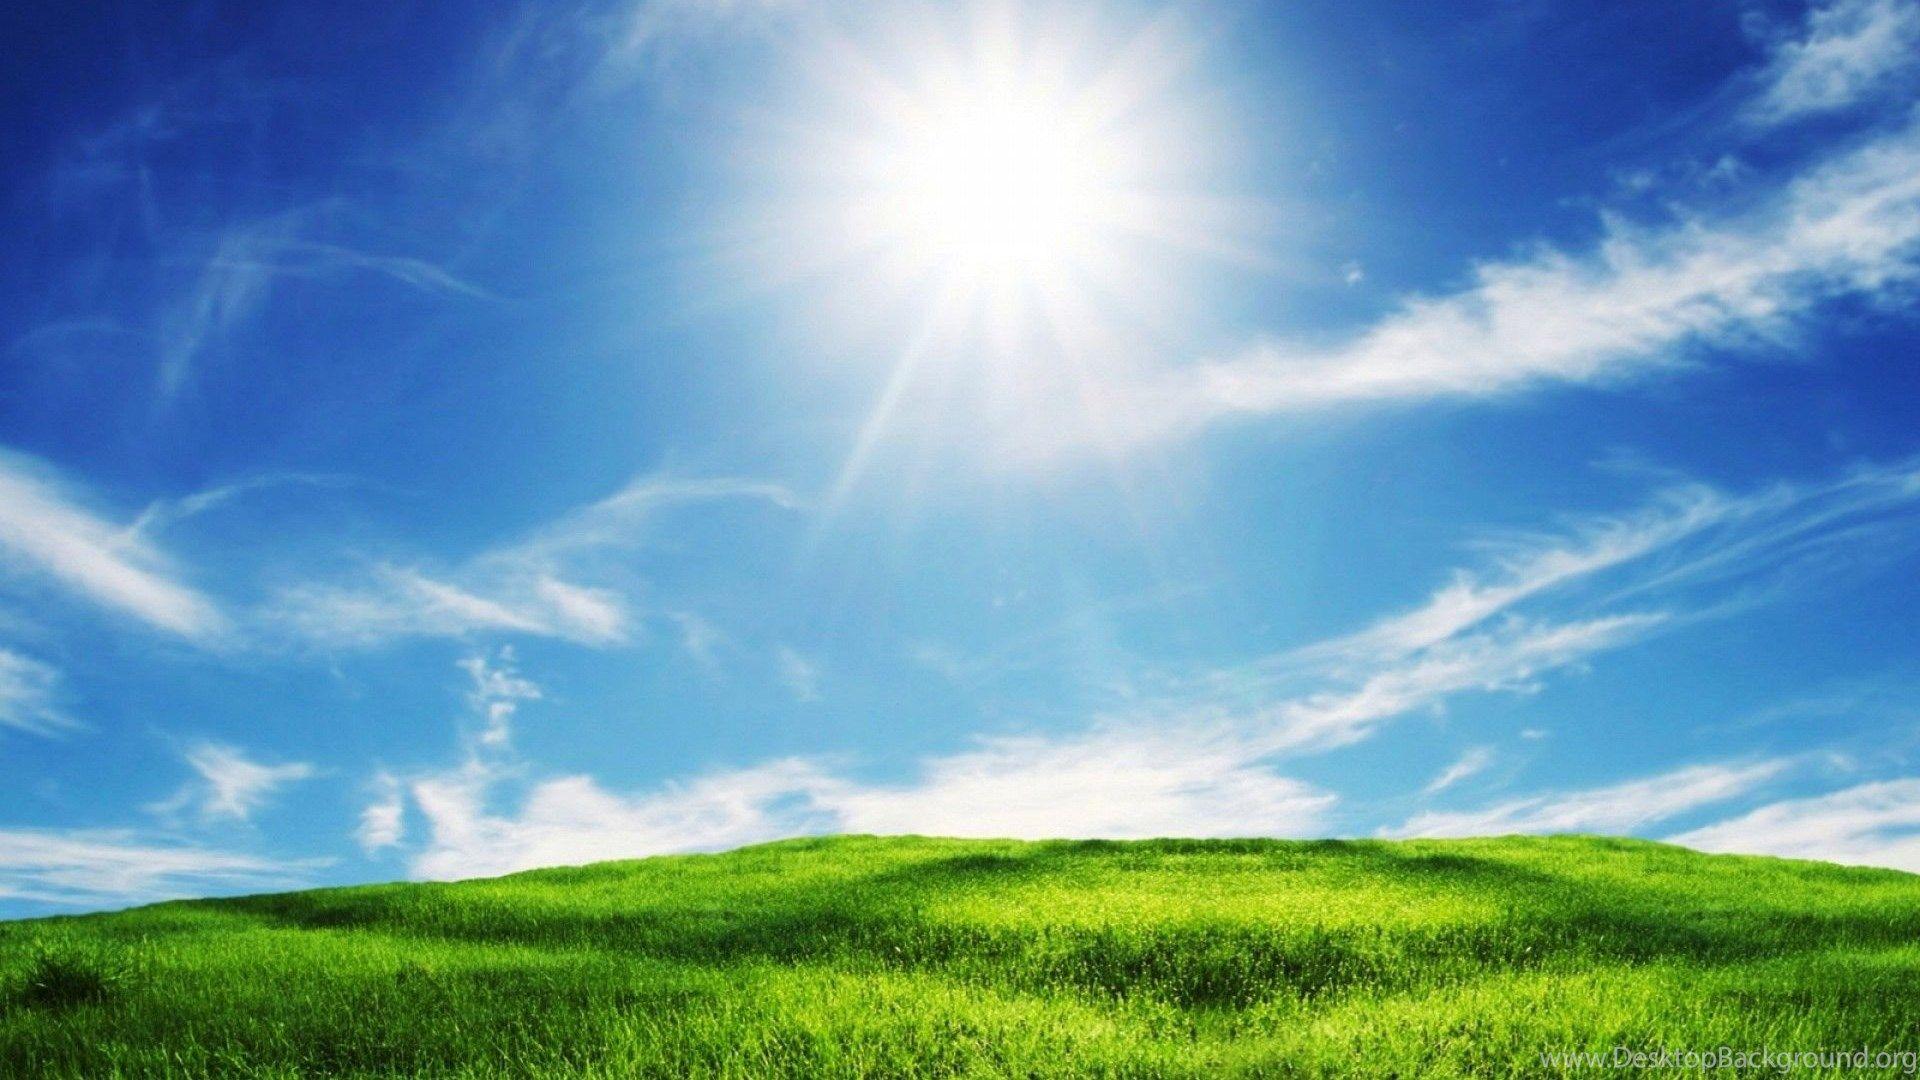 Sky and Grass Wallpapers - Top Free Sky and Grass Backgrounds ...